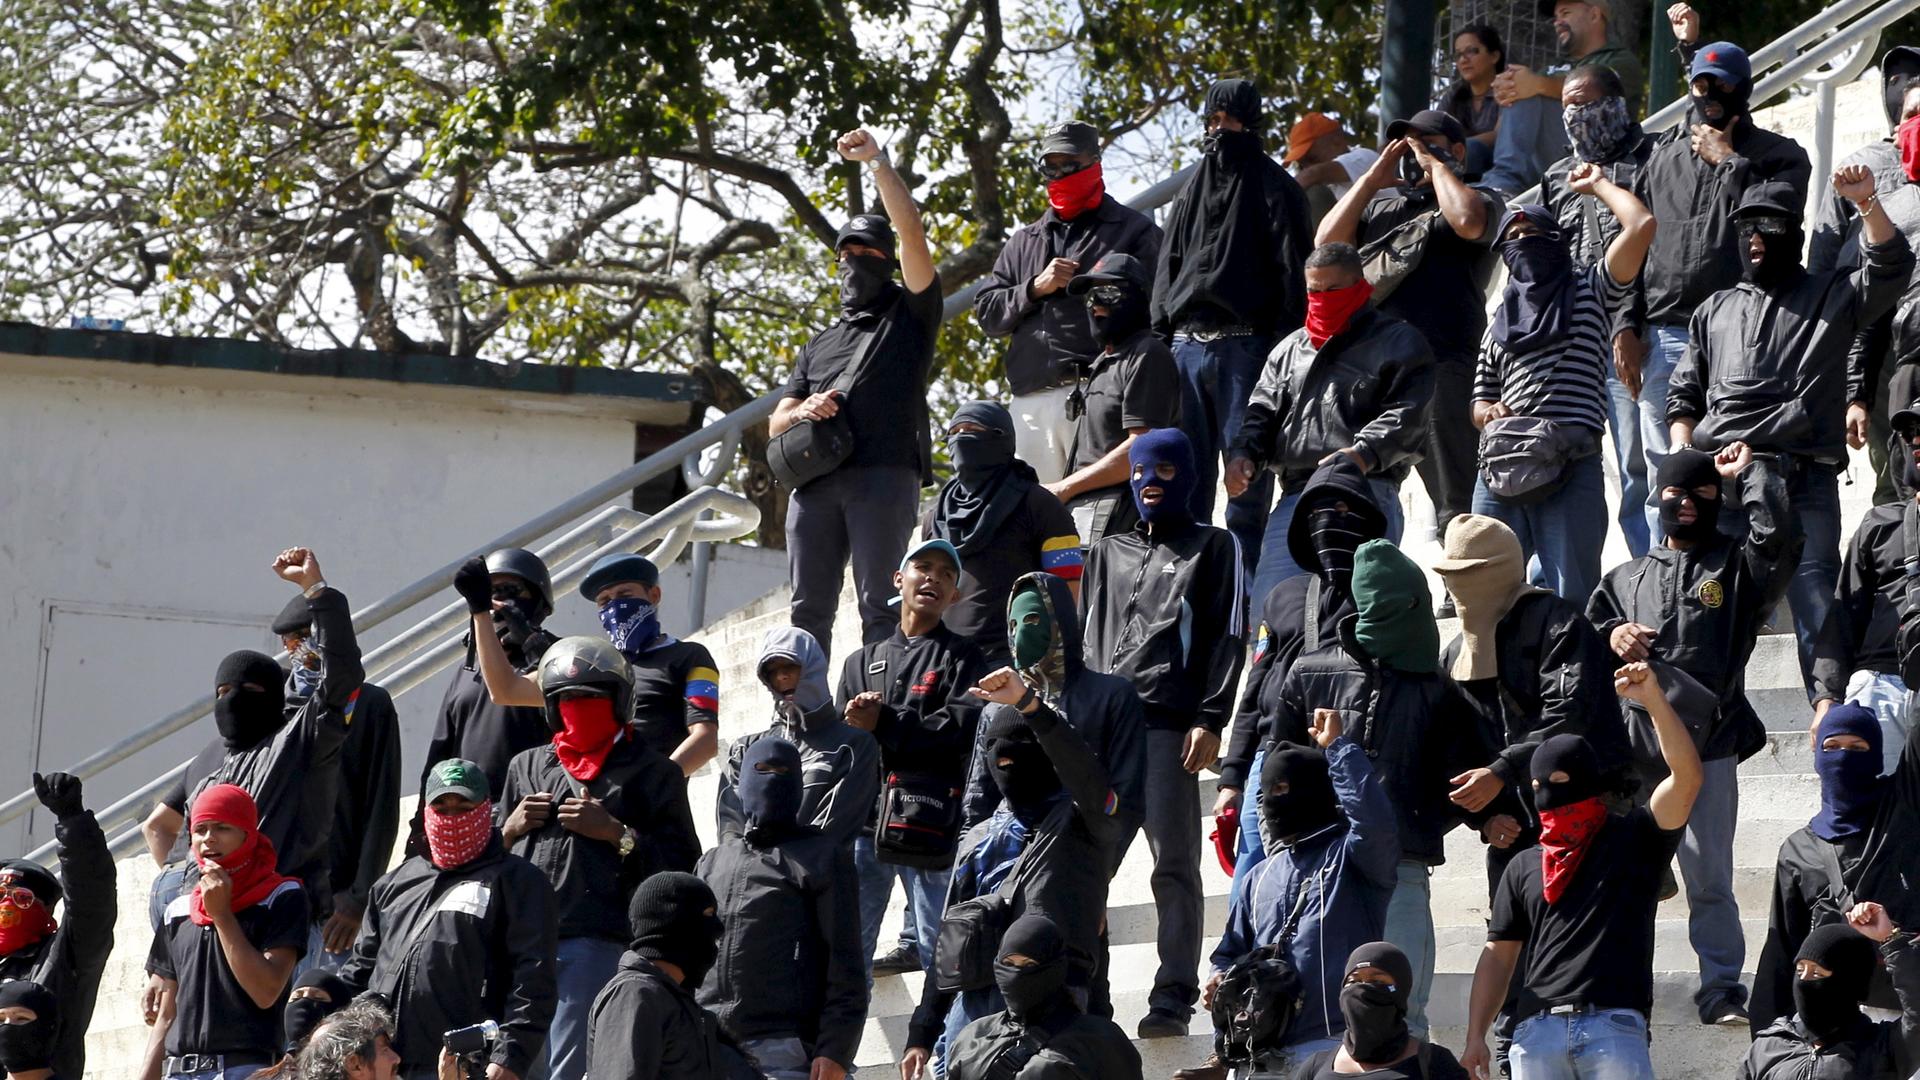 Young men wearing black stand on steps and raise fists in air. 